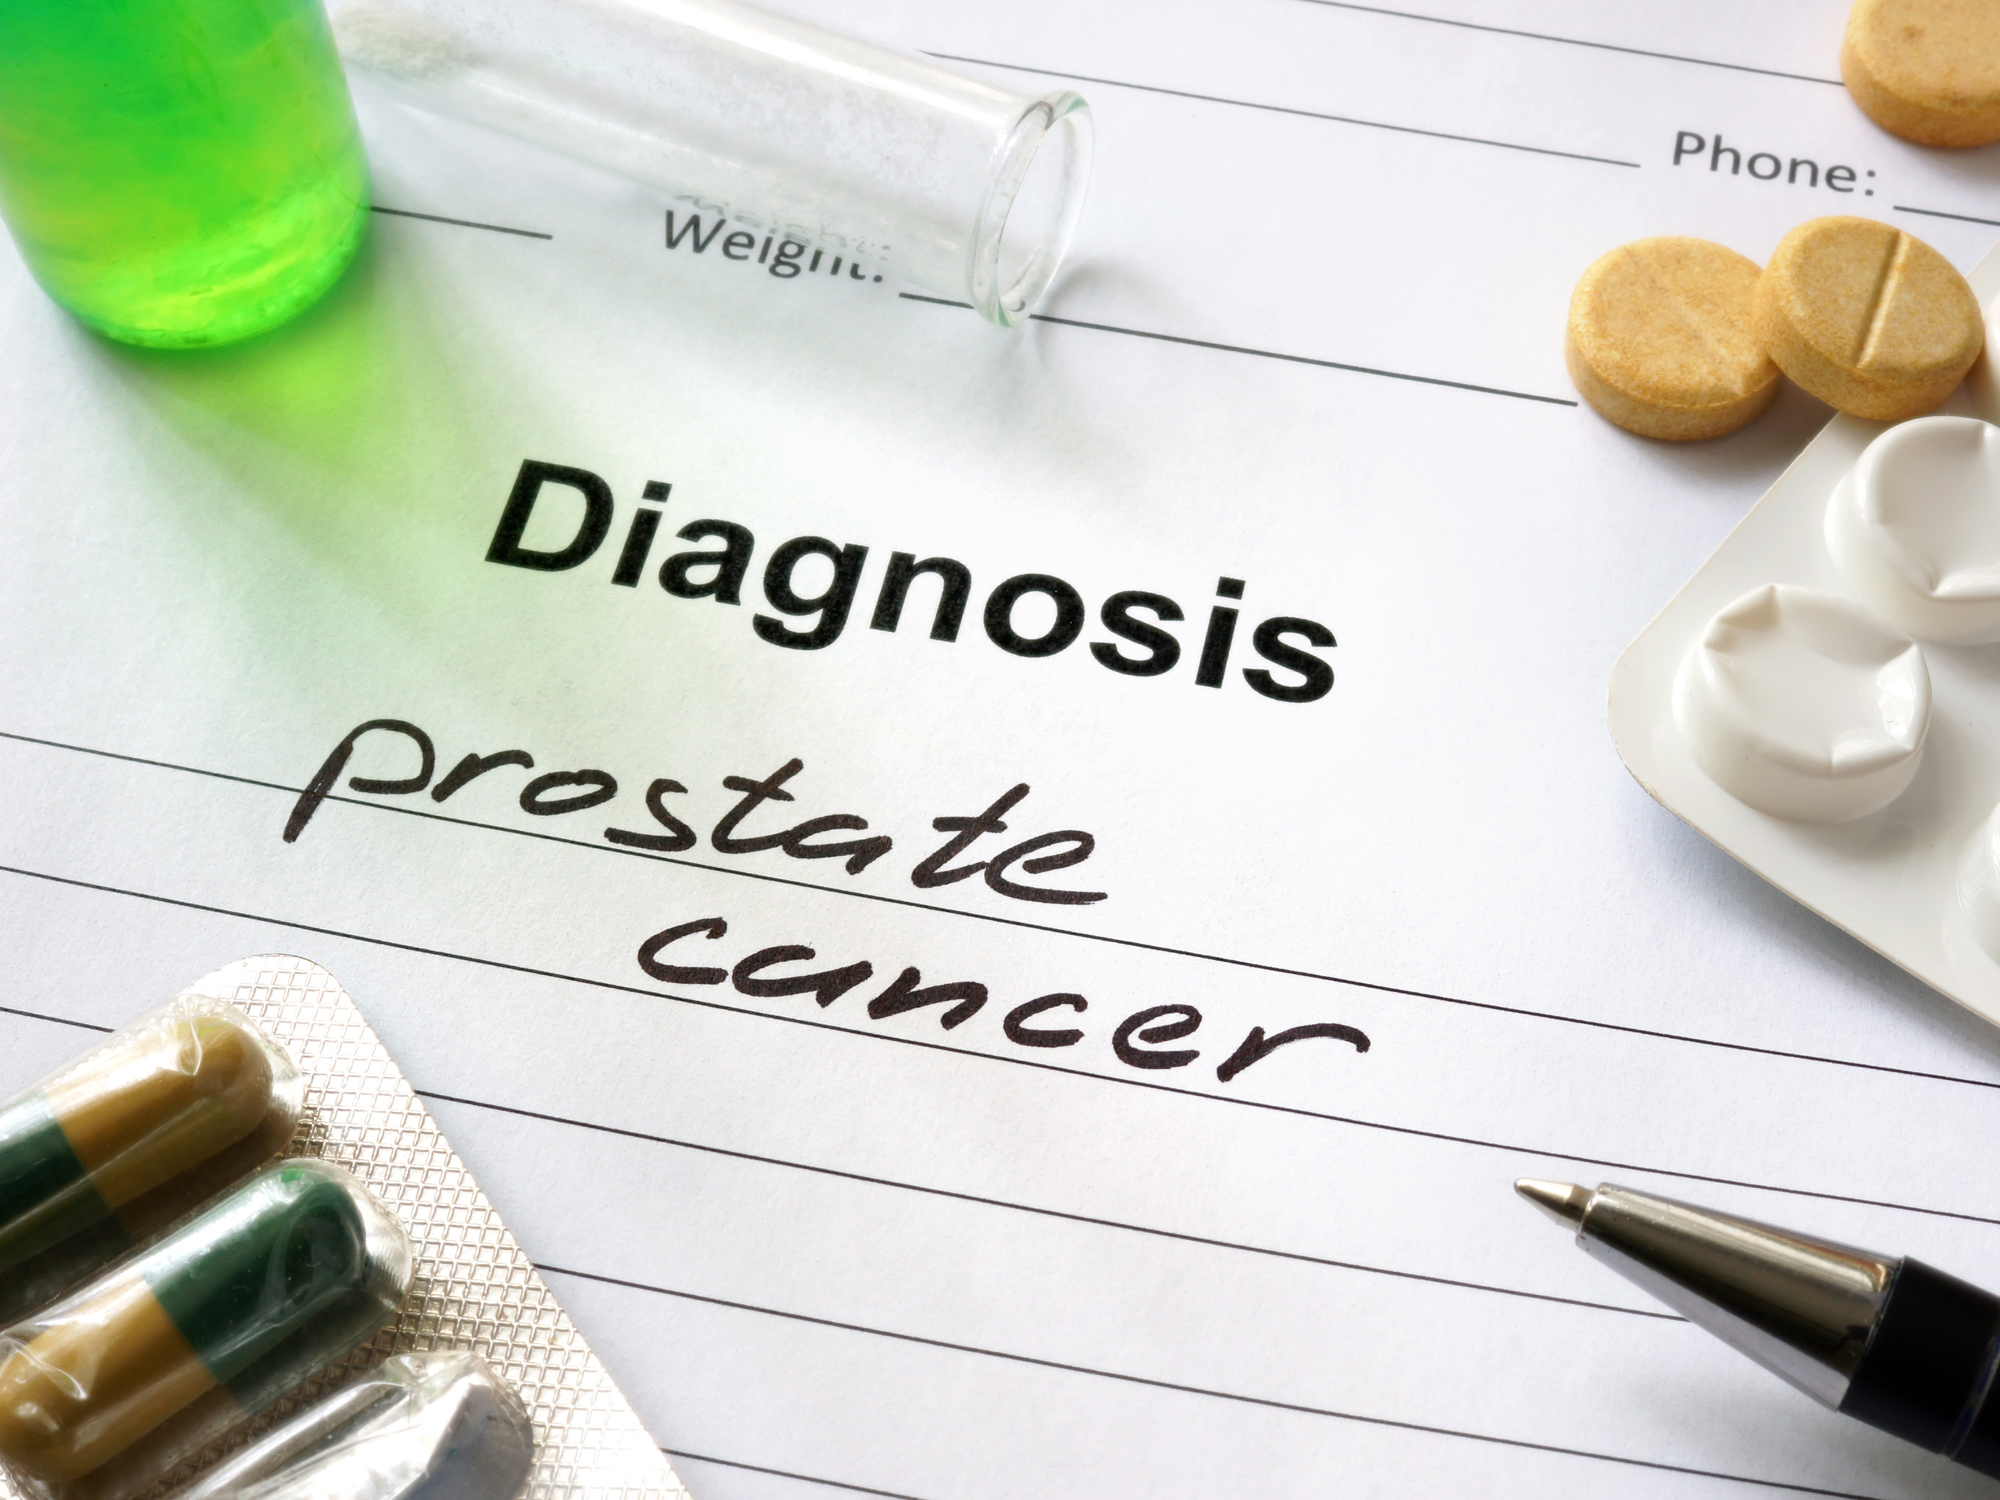 A better way to detect prostate cancer